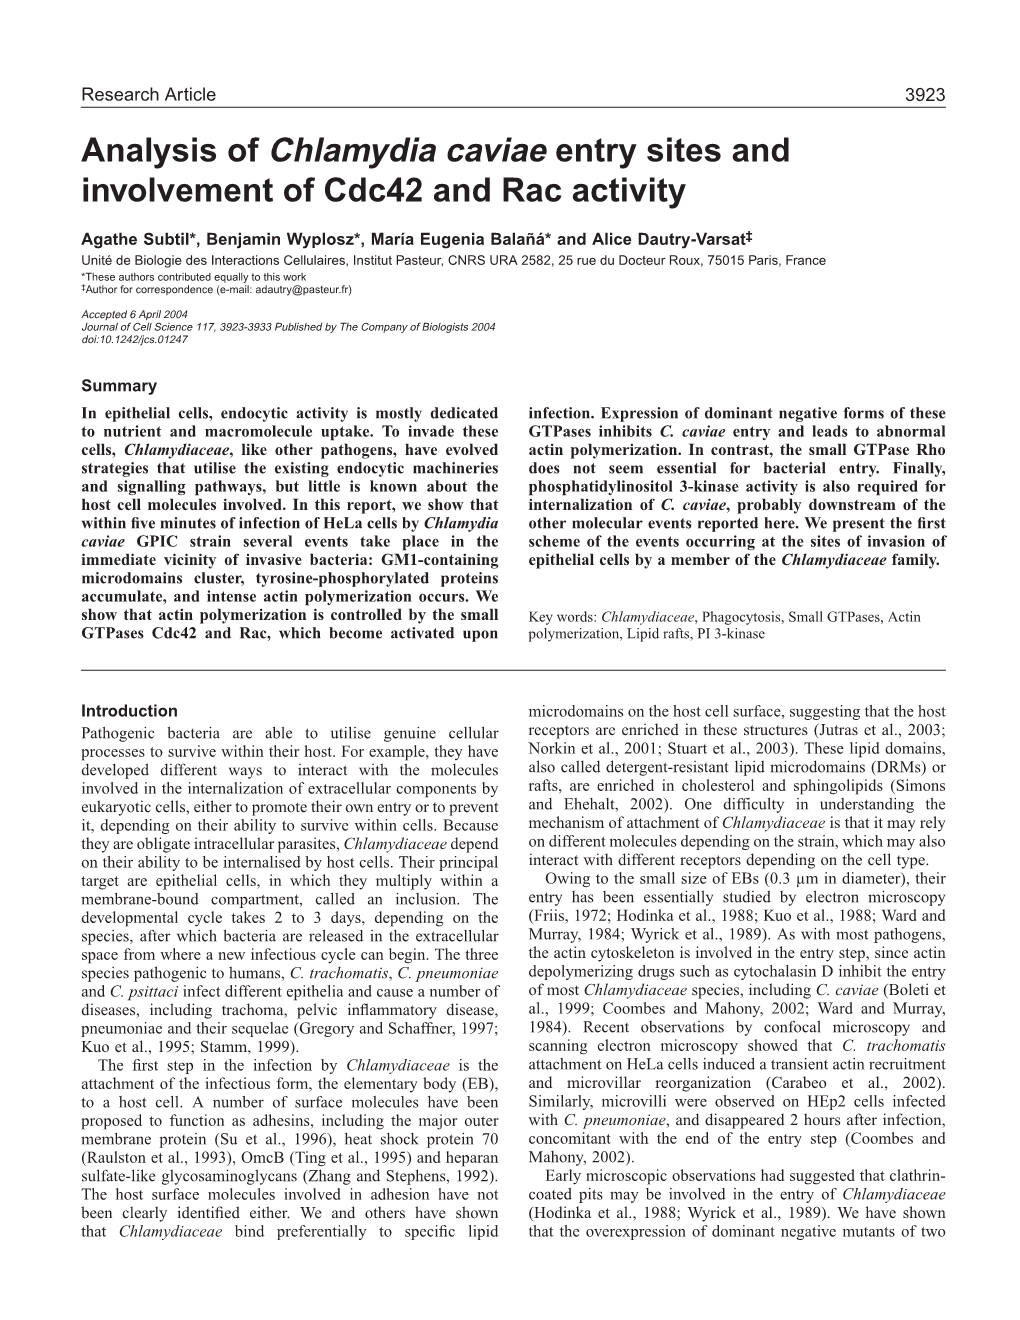 Analysis of Chlamydia Caviae Entry Sites and Involvement of Cdc42 and Rac Activity